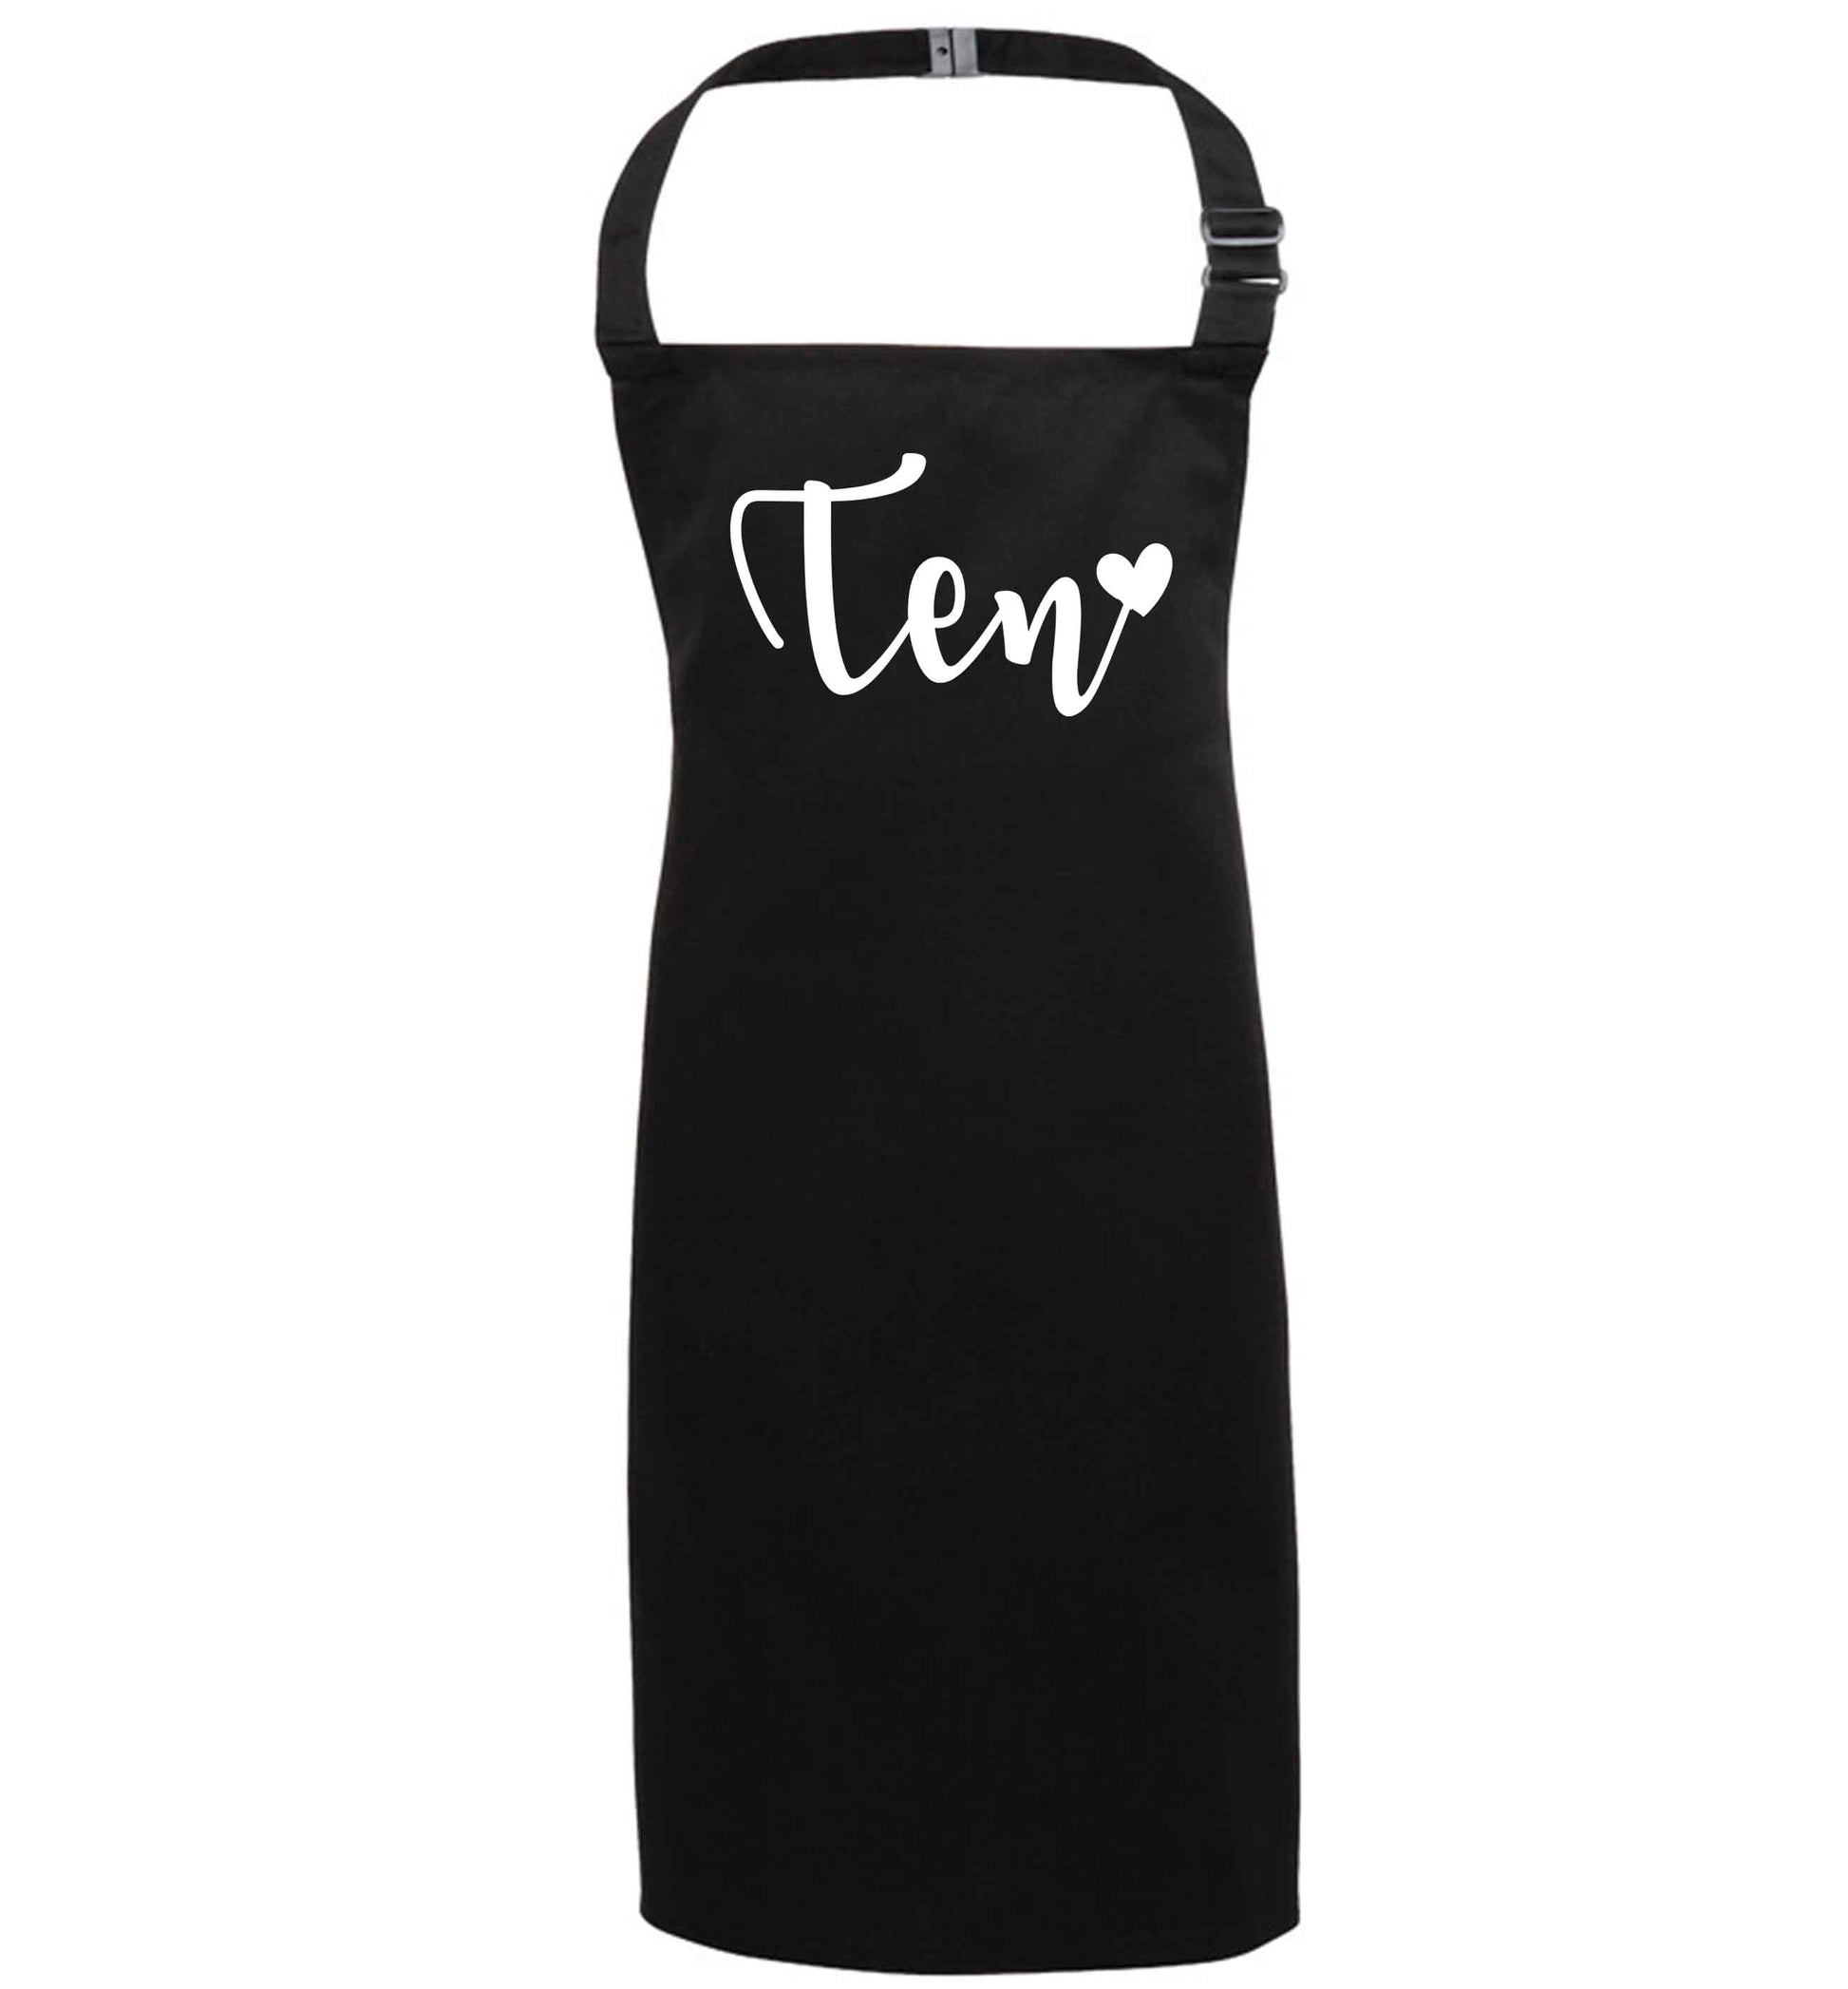 Ten and heart black apron 7-10 years